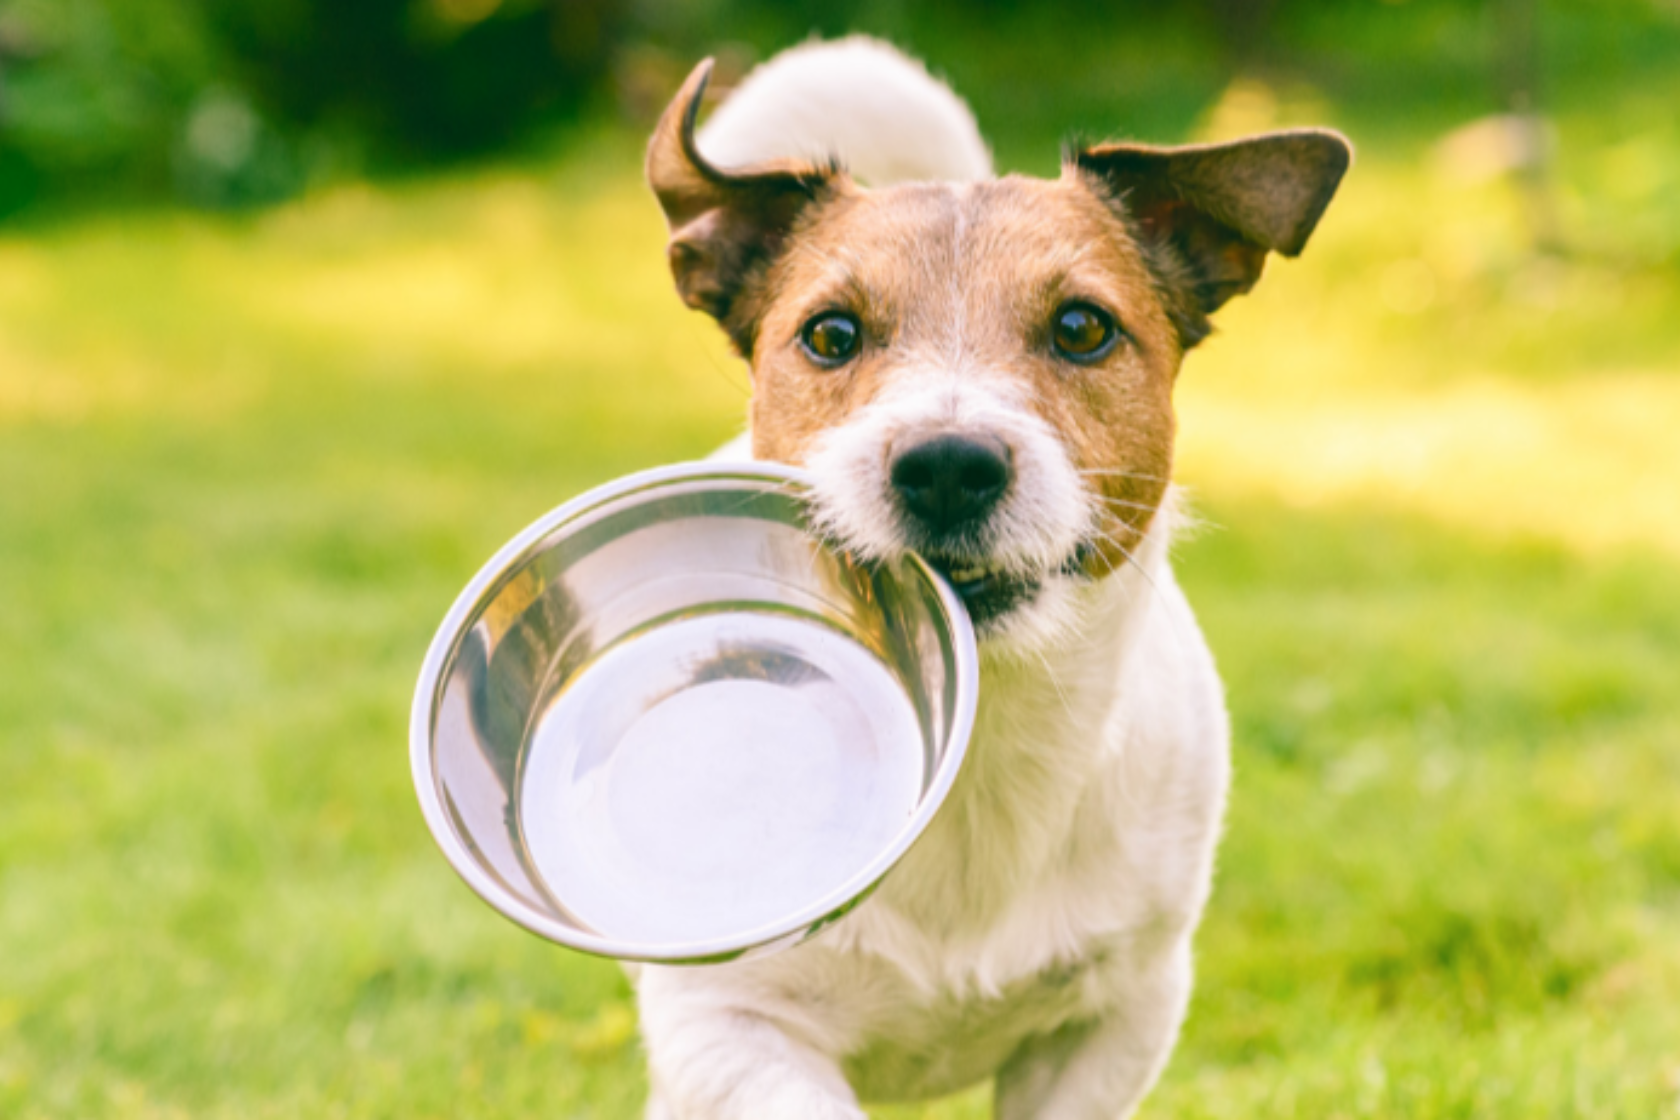 Dog outside holding empty food bowl in its mouth